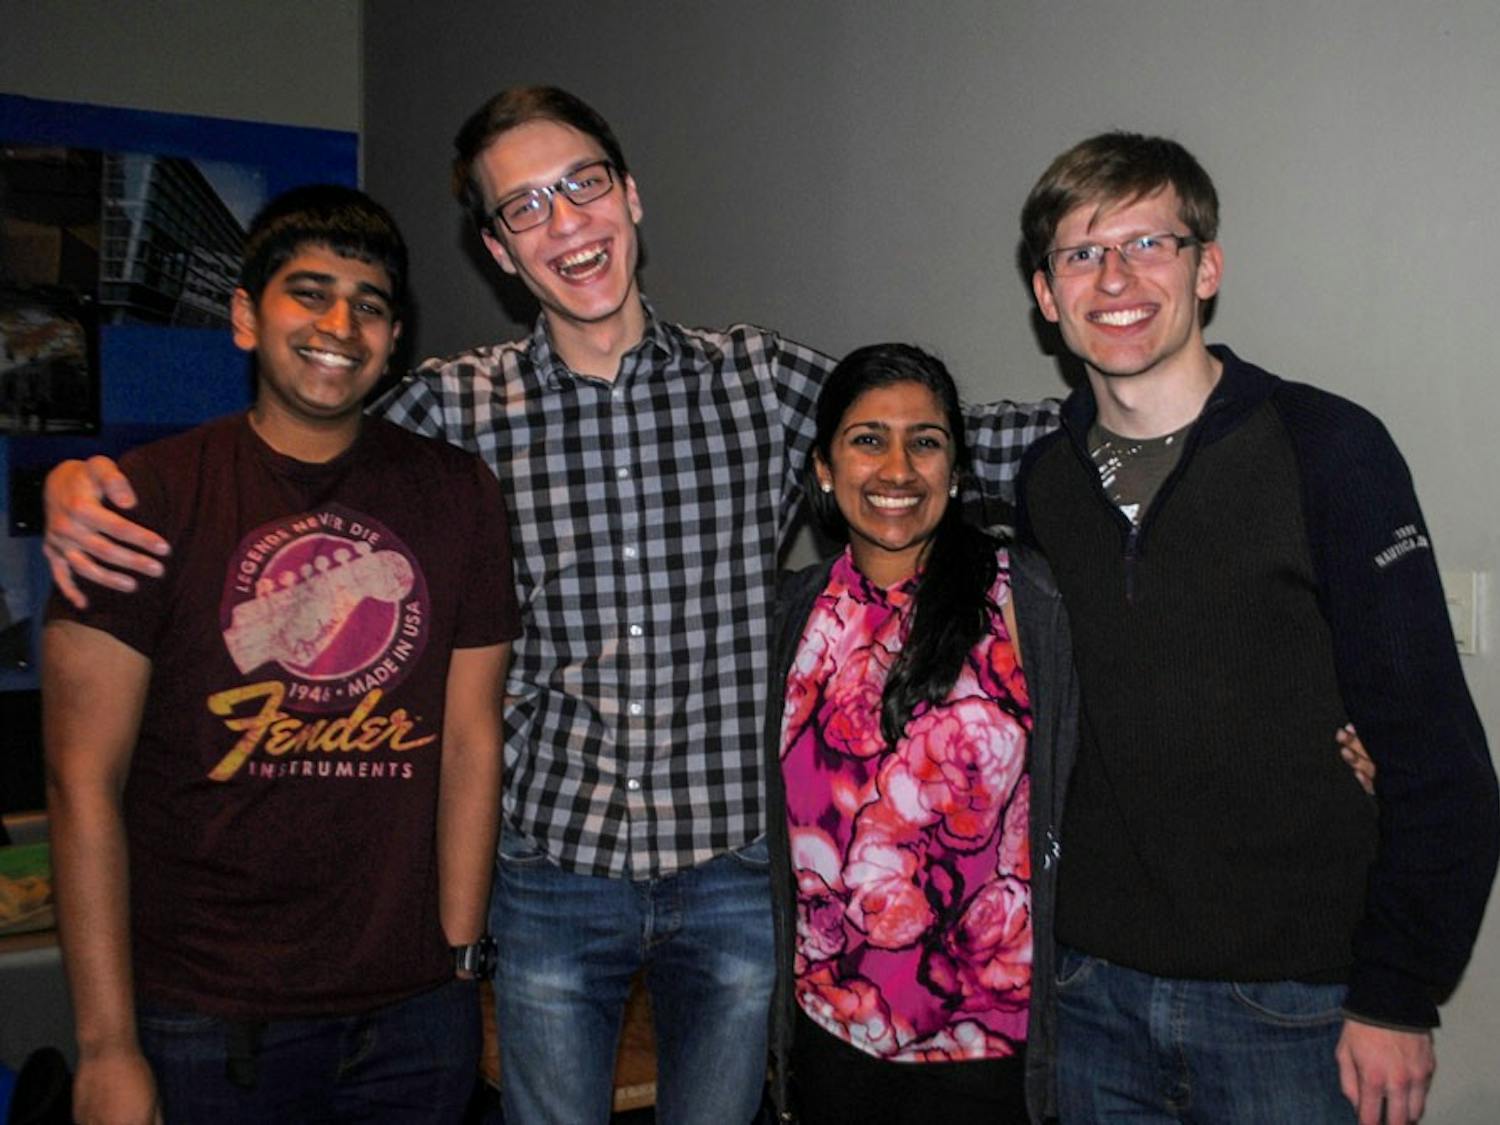 (From L to R)&nbsp;Elliot Lovisos,&nbsp;Christian Koehler,&nbsp;Priscilla Kabilamany and&nbsp;Justin Jacob attended Friday's "I hate religion because ...' event in the Student Union.&nbsp;